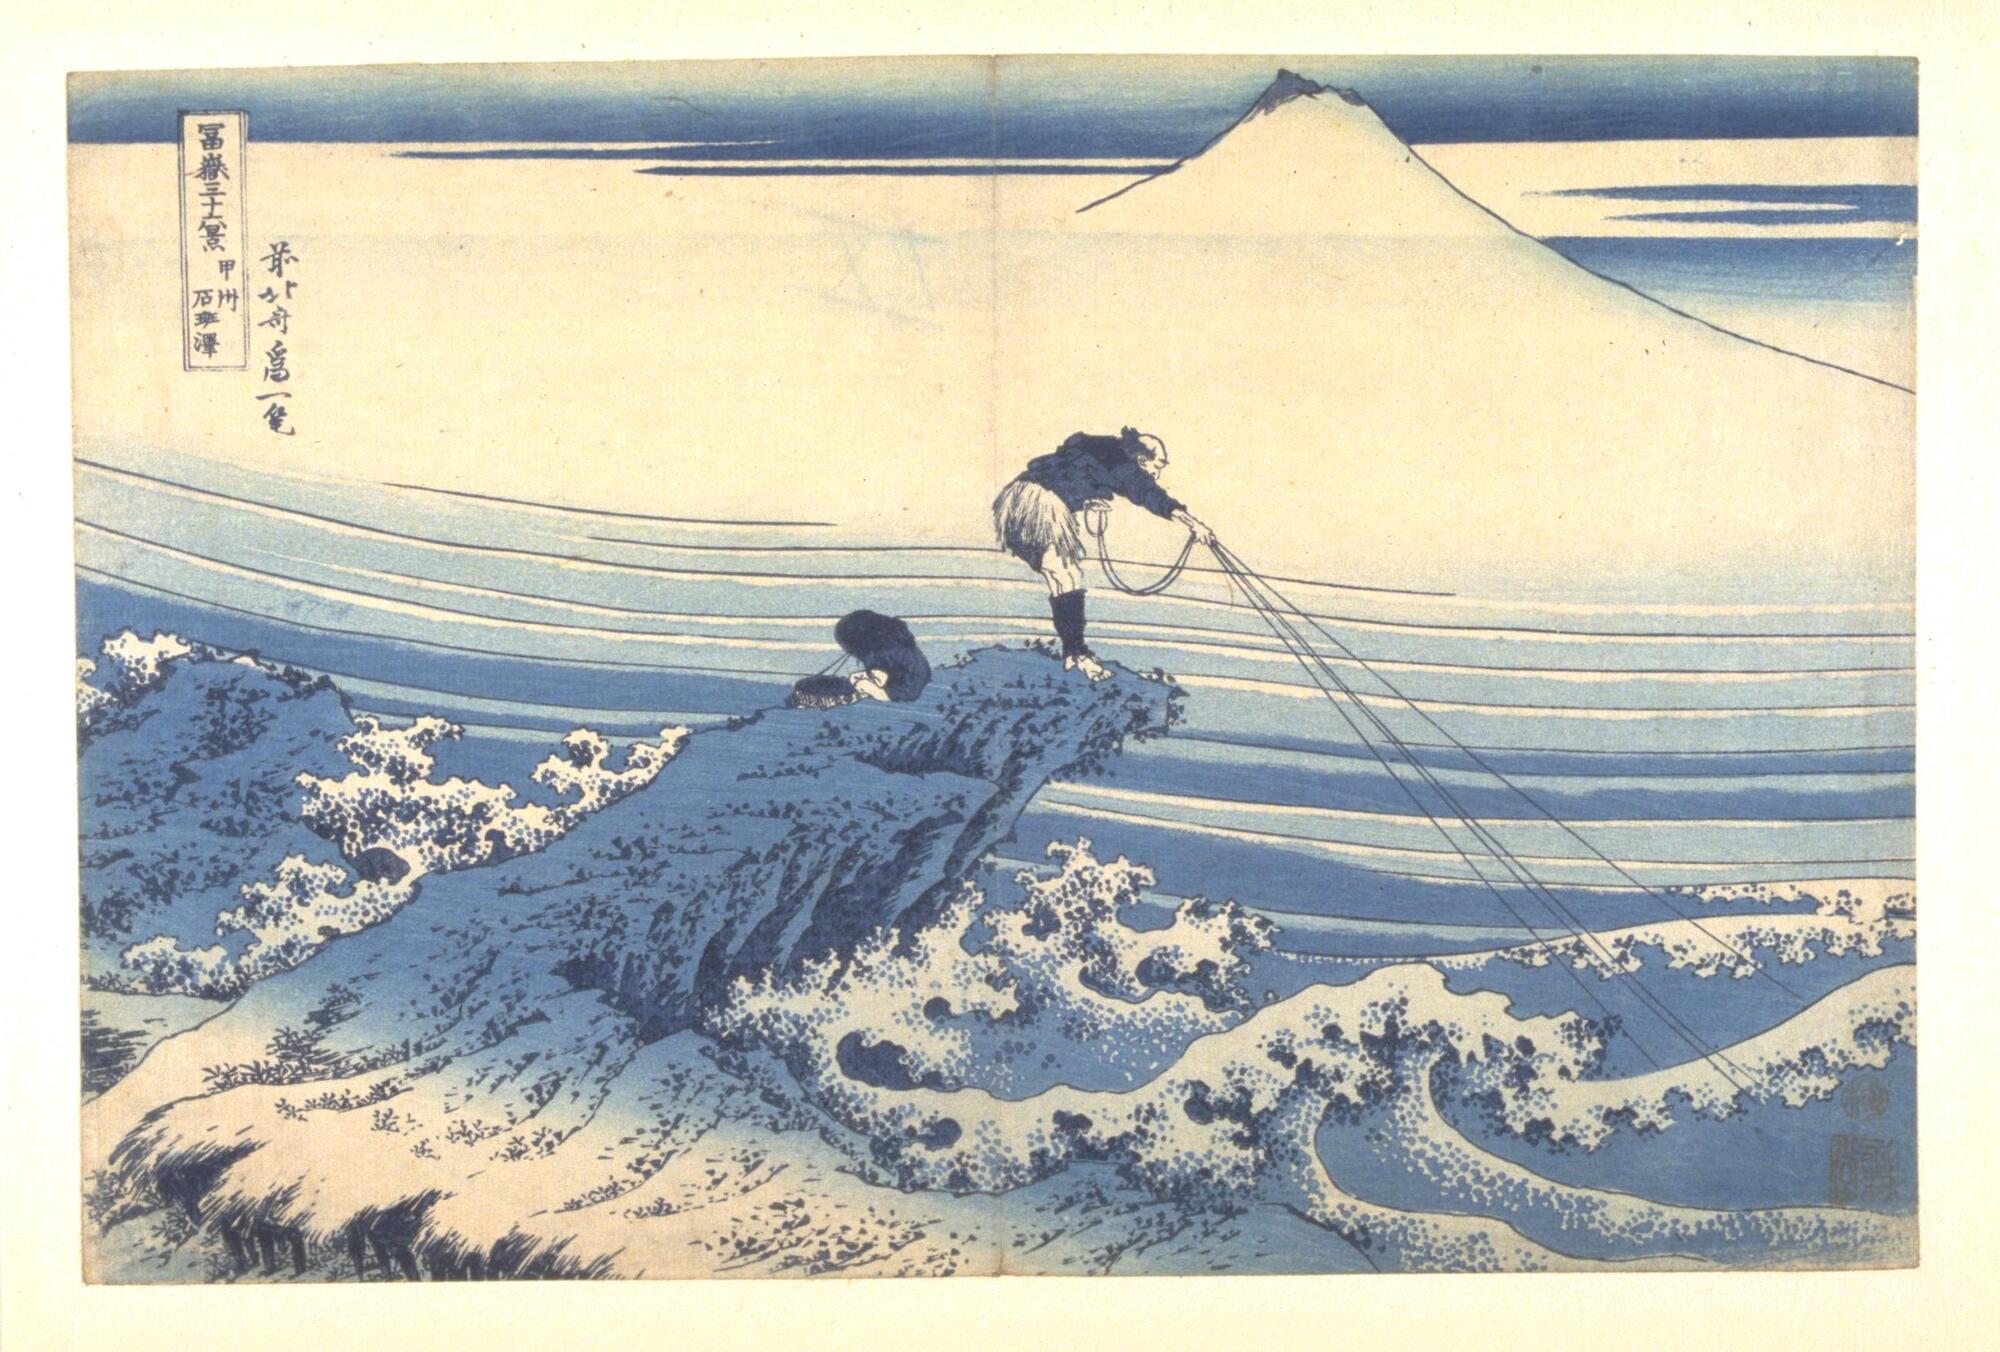 The print depicts a fisherman standing on a seaside cliff perfoming loneline fishing. There are great waves below him striking the cliff and there is a mountain in the background. The print mainly applies the color of white and shades of blue. The artist inscribed the title of the work along with his signature on the upper left-hand corner.